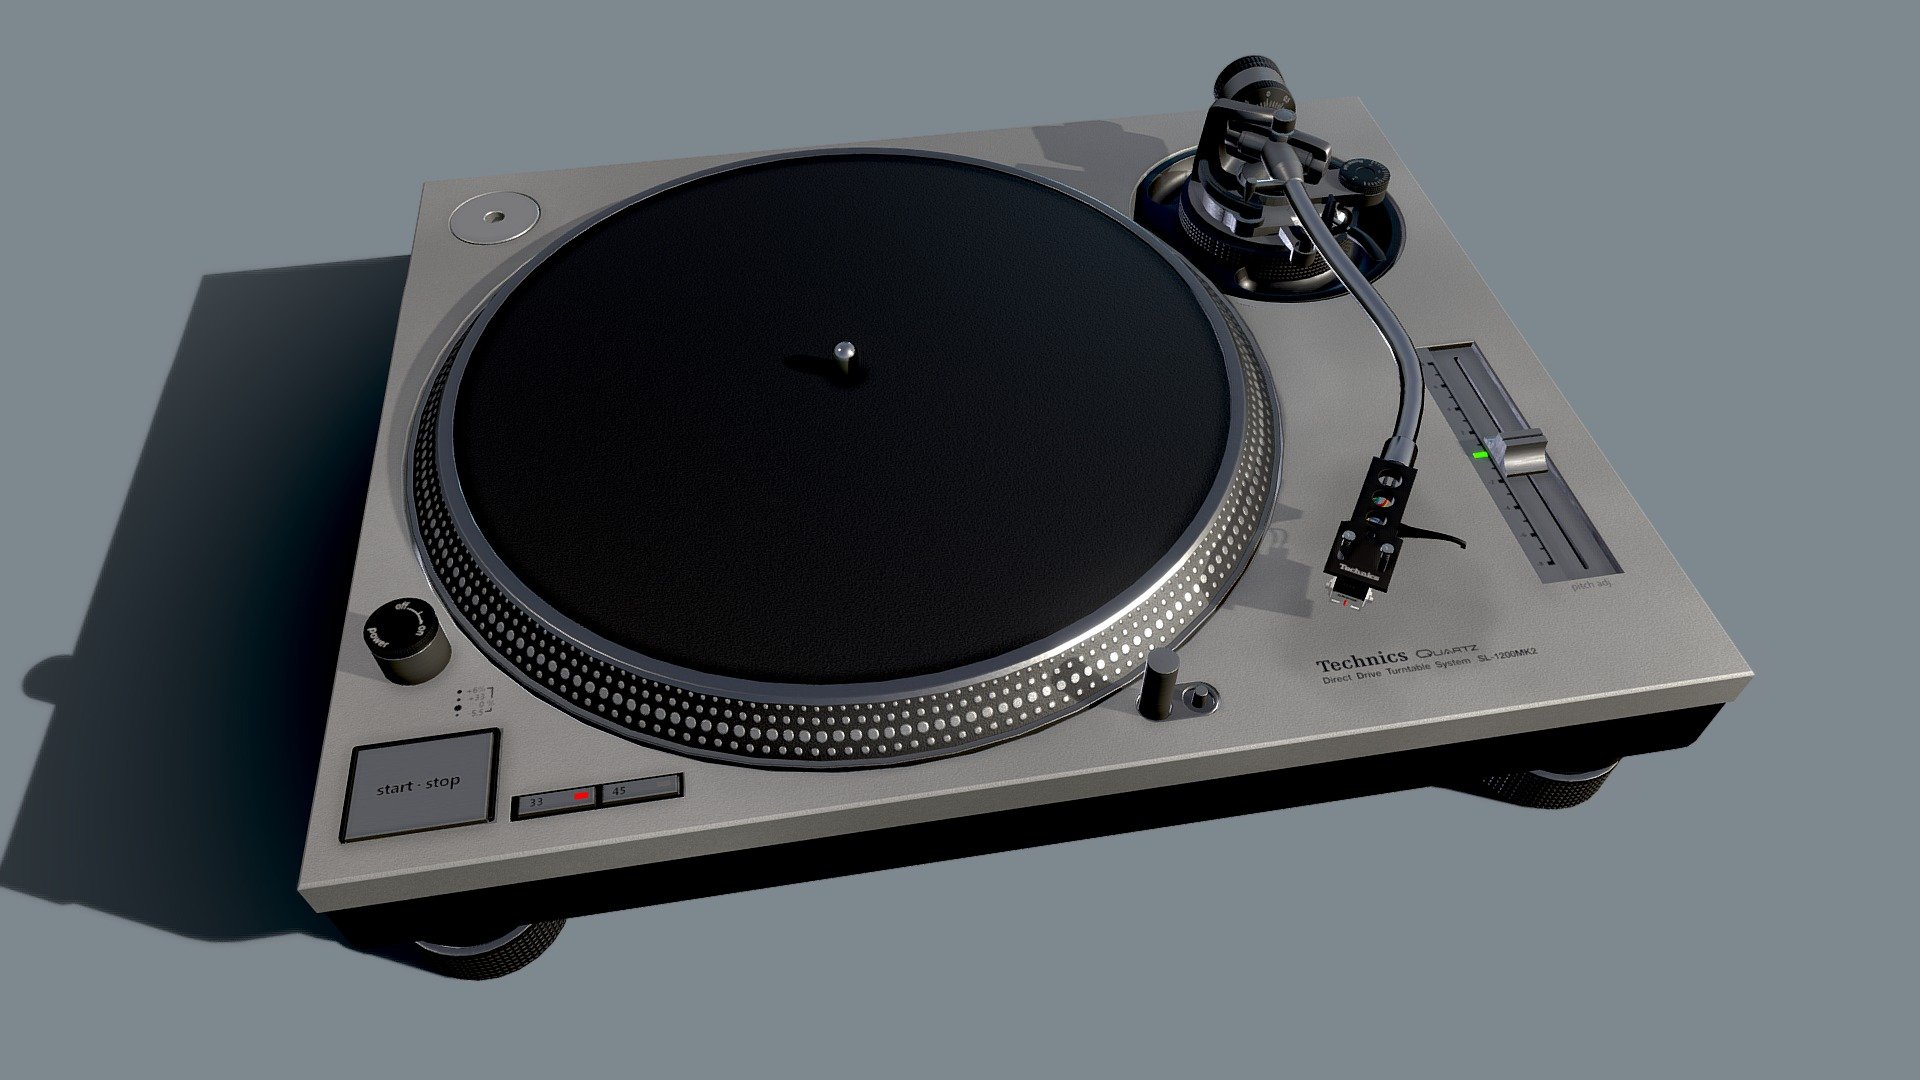 Original Technics SL1200 mk2 turntable.

Model:

- Real-world Scale

- All correct proportions

- Measured to the detail from the real model

- 22k Polygons


Textures:

- Physically-Based Rendering workflow

- 4096px resolution

- Single material - no need for sorting





Basecolor

Roughness

Metalliic

Normal

Emissive
 - Technics SL1200 MK2 Turntable - Buy Royalty Free 3D model by Prelight Media (@prelightmedia) 3d model